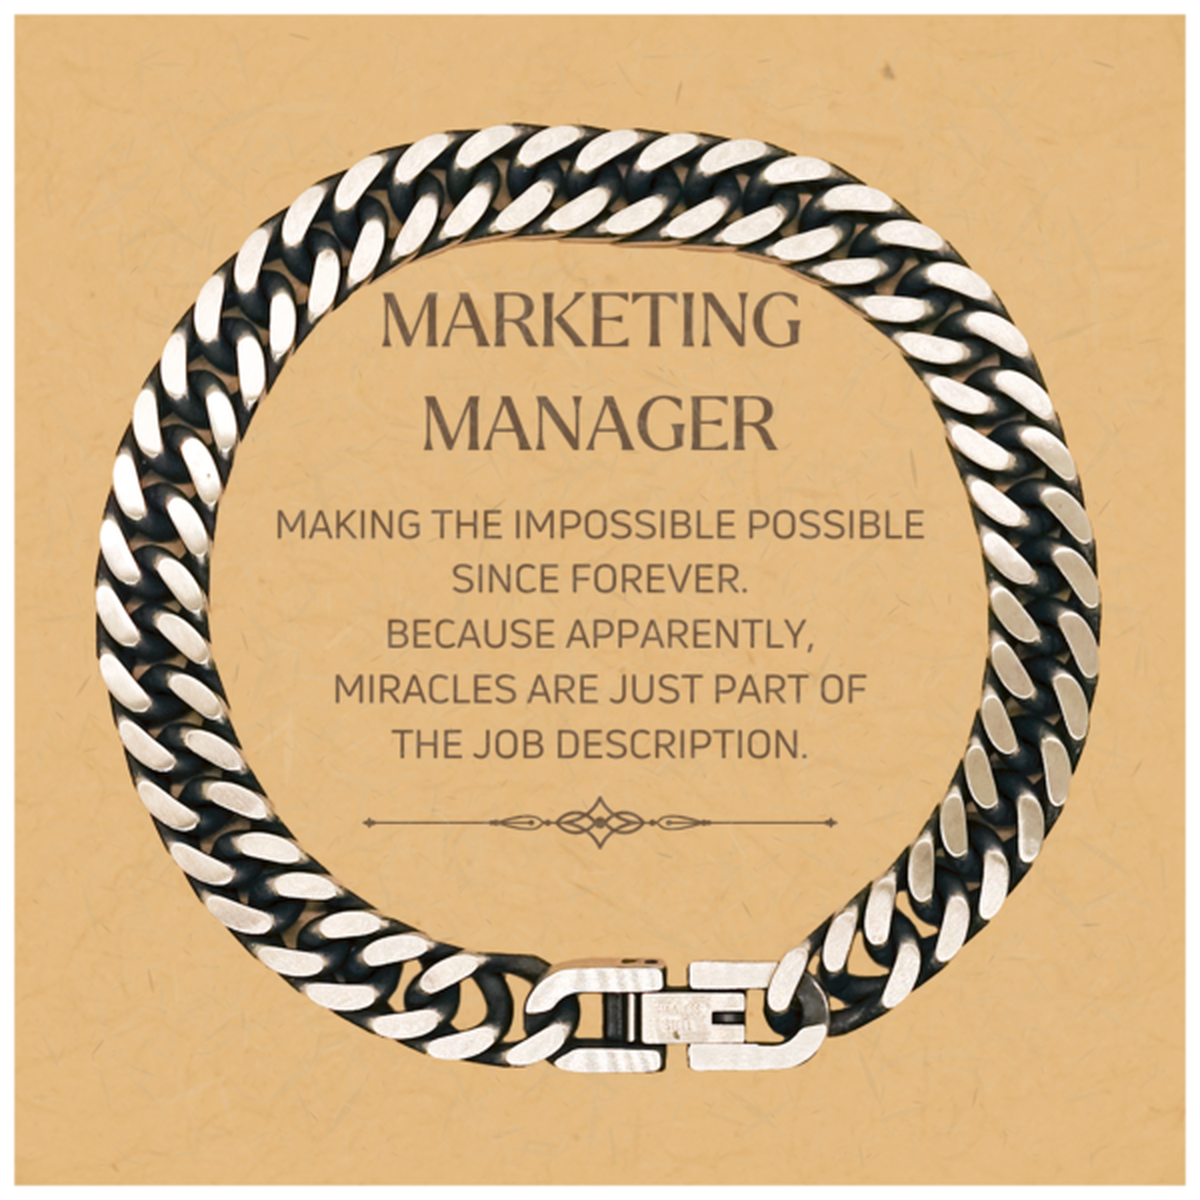 Funny Marketing Manager Gifts, Miracles are just part of the job description, Inspirational Birthday Christmas Cuban Link Chain Bracelet For Marketing Manager, Men, Women, Coworkers, Friends, Boss